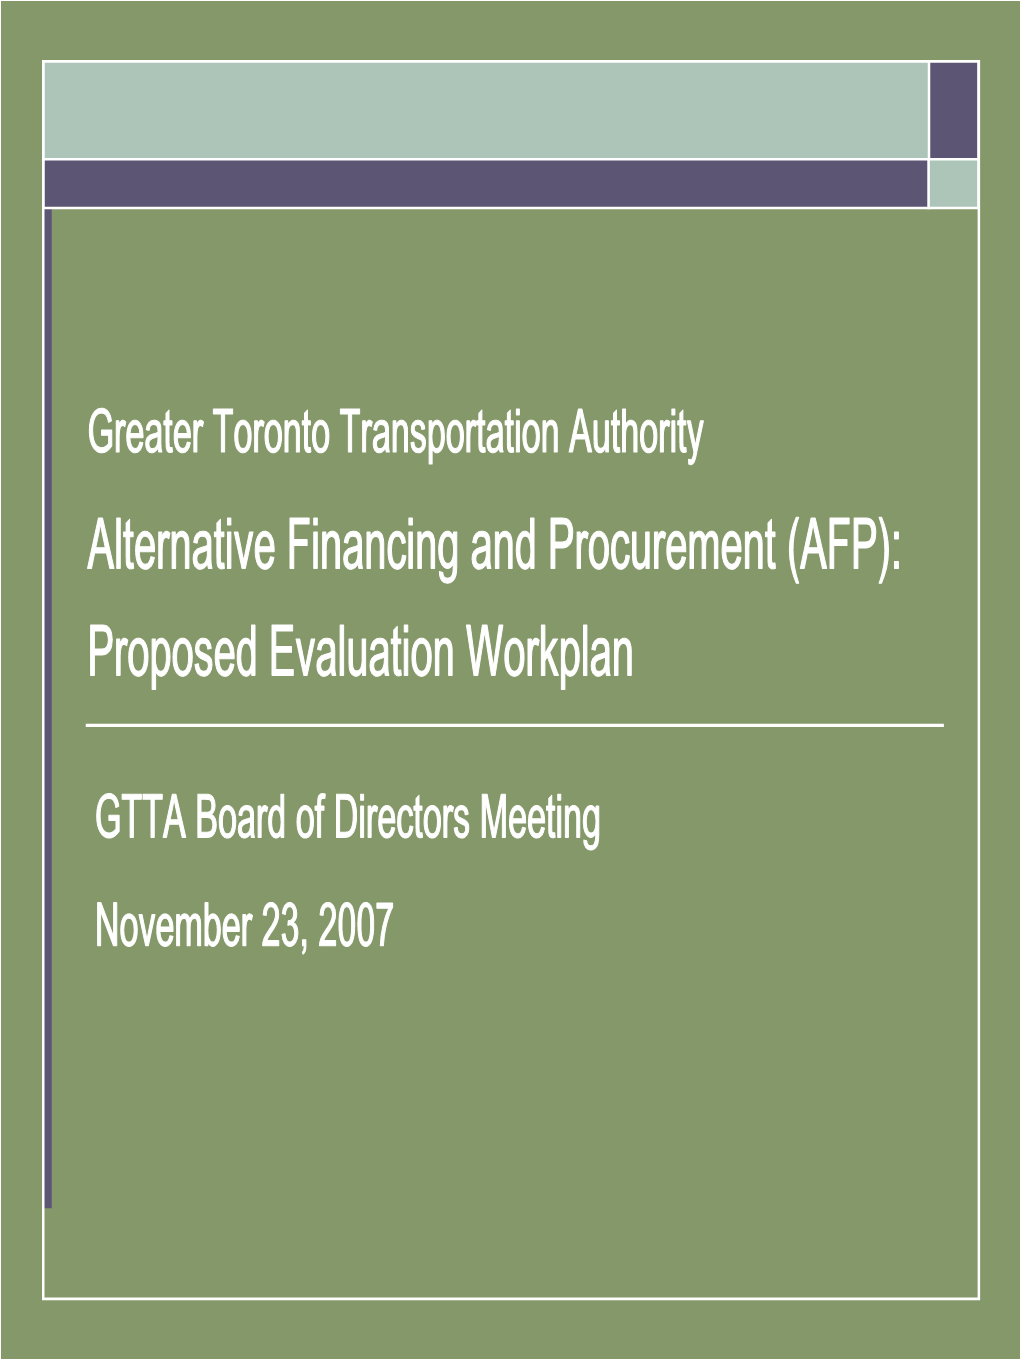 Greater Toronto Transportation Authority Alternative Financing and Procurement (AFP): Proposed Evaluation Workplan